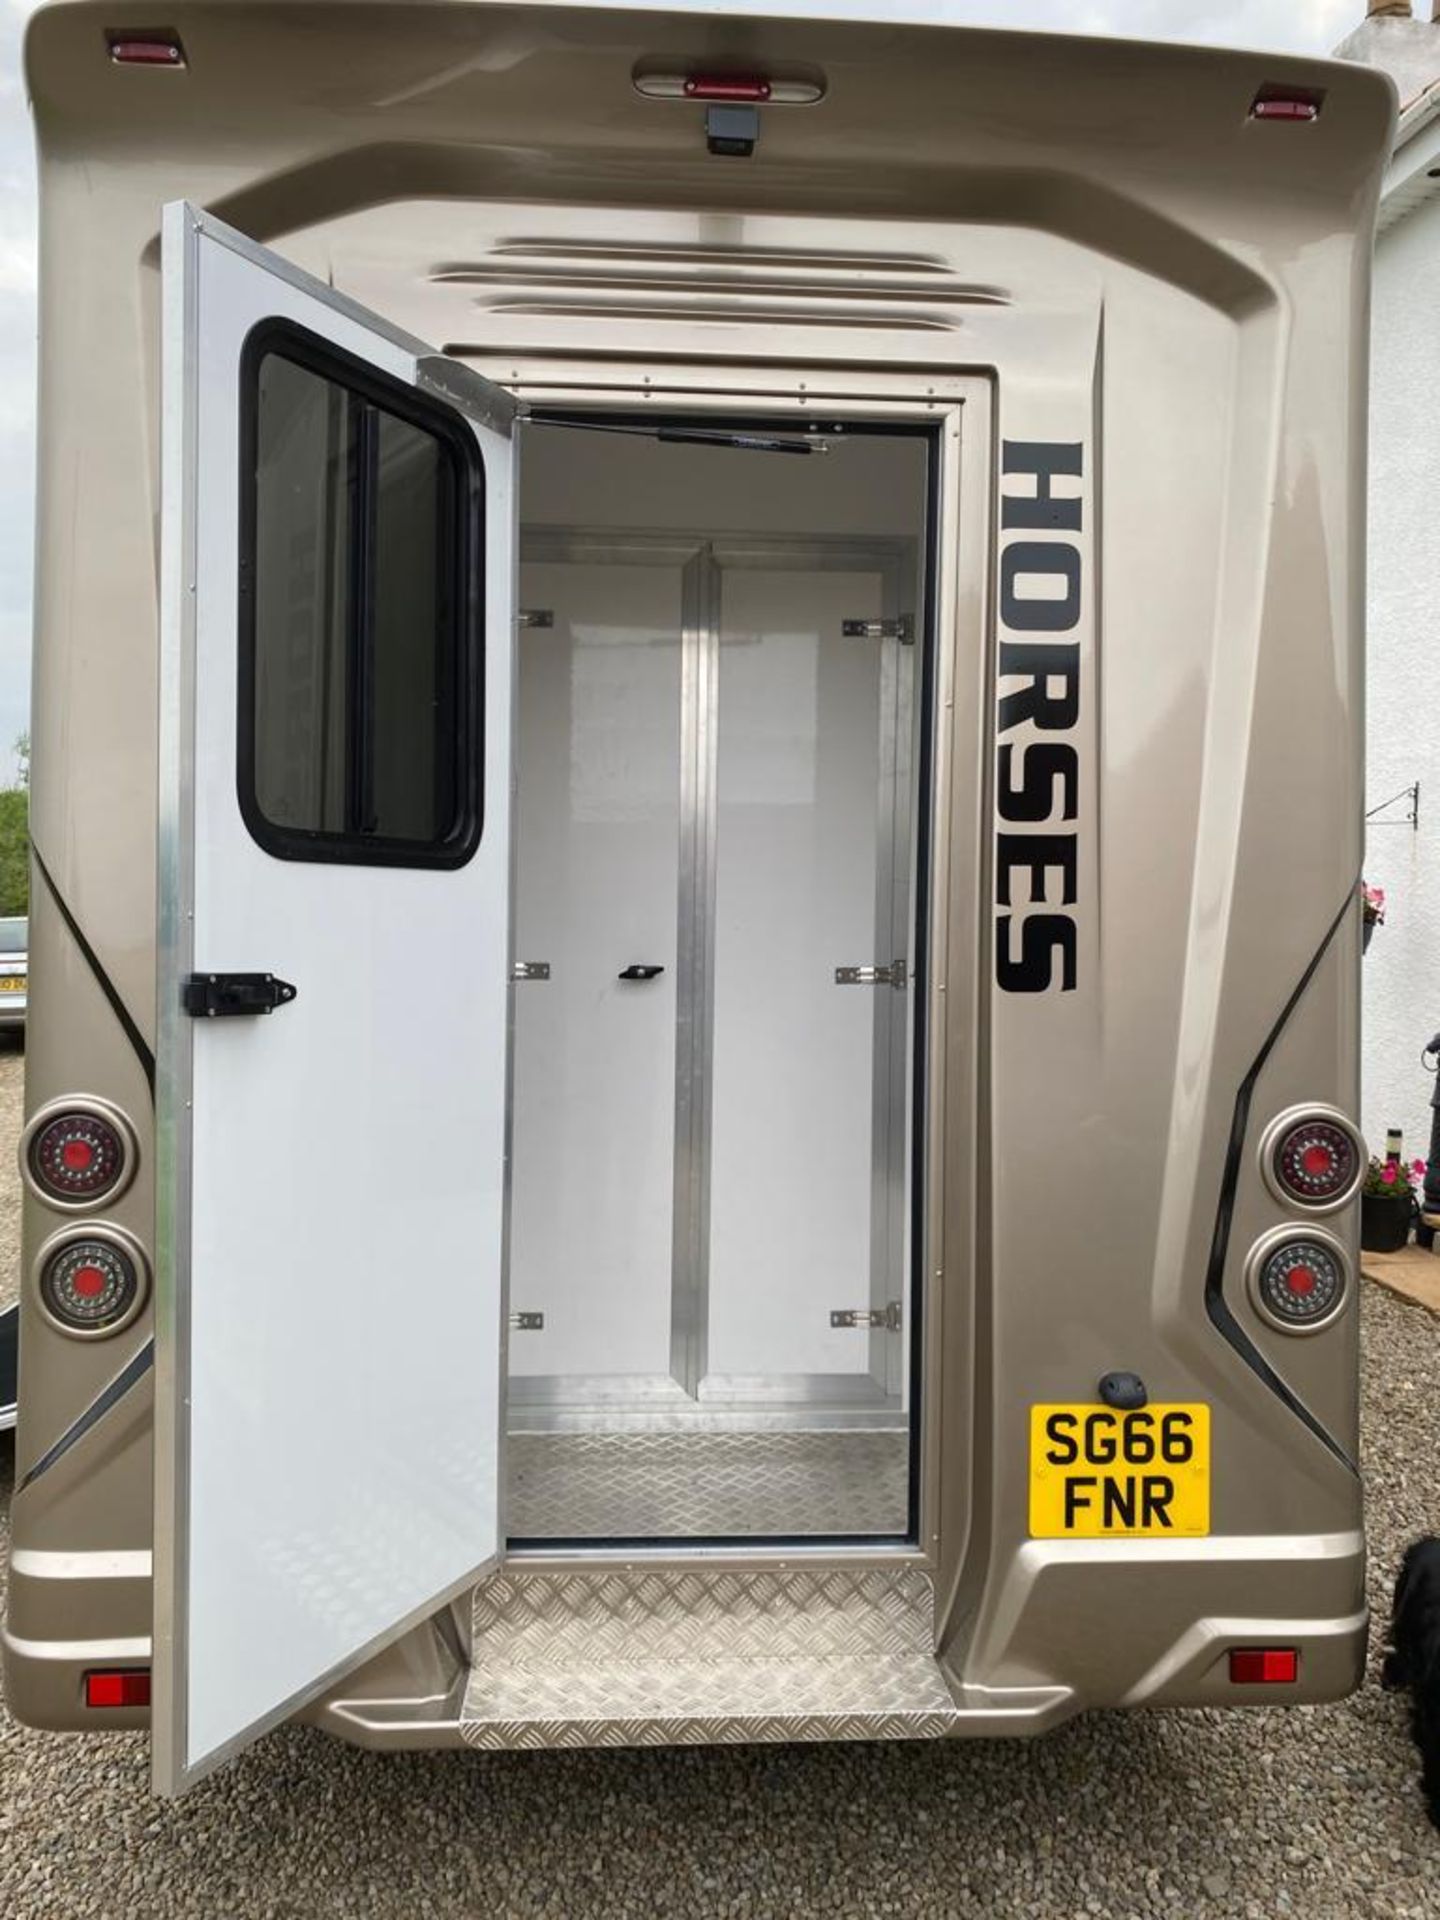 BRAND NEW 2023 BUILD 3.5TON 66 PLATE REGENT HORSEBOX ON A CITROEN RELAY CHASSIS - Image 9 of 13